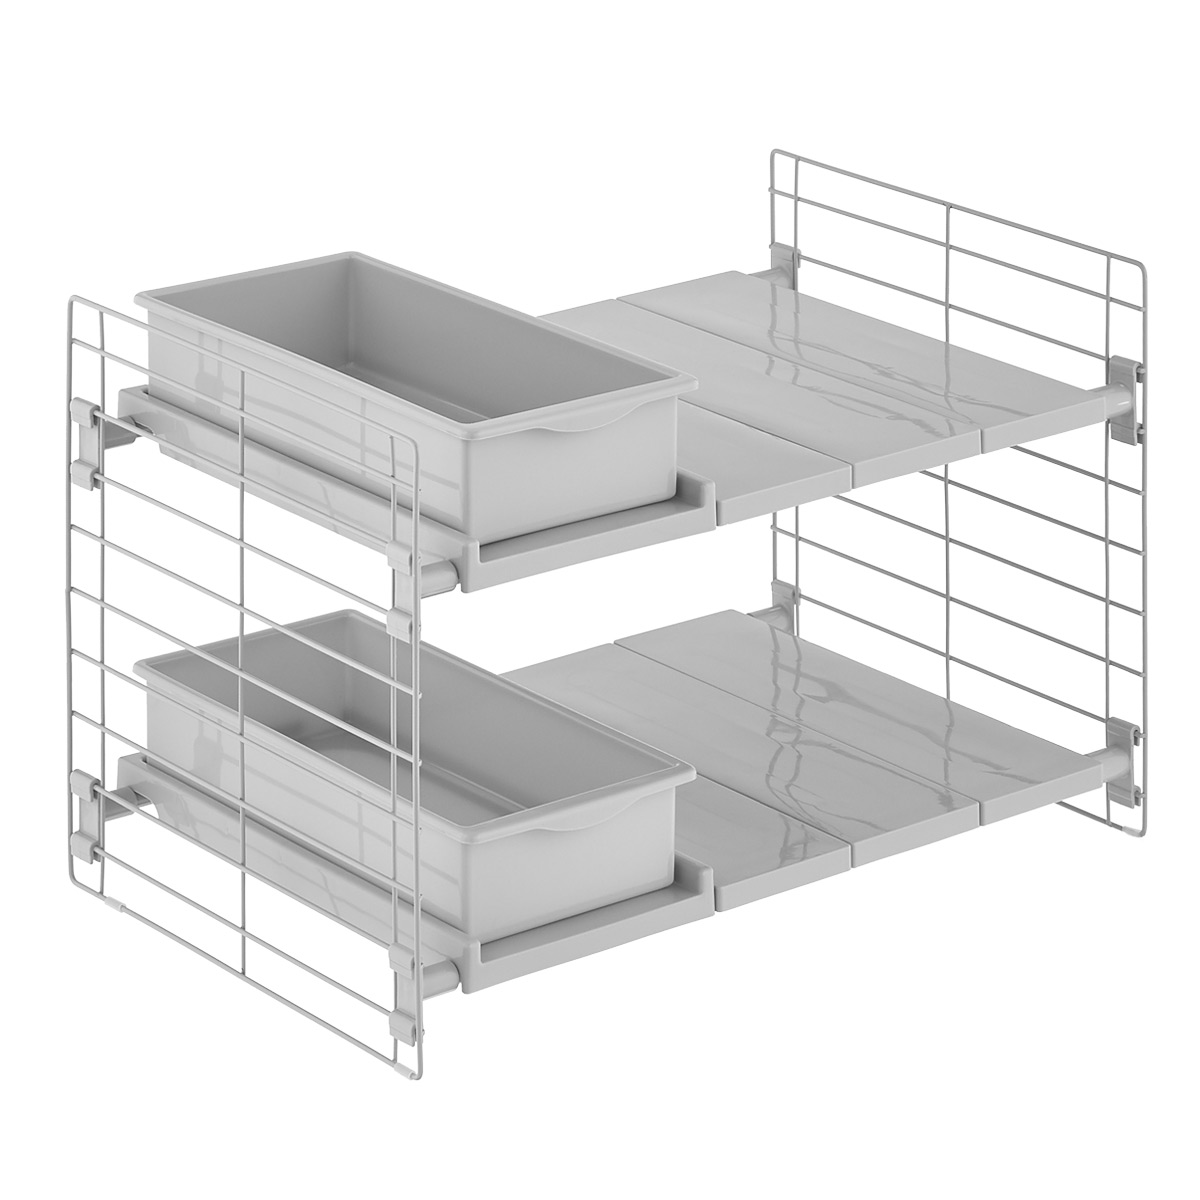 https://www.containerstore.com/catalogimages/417540/10077660_expandable_undersink_organi.jpg